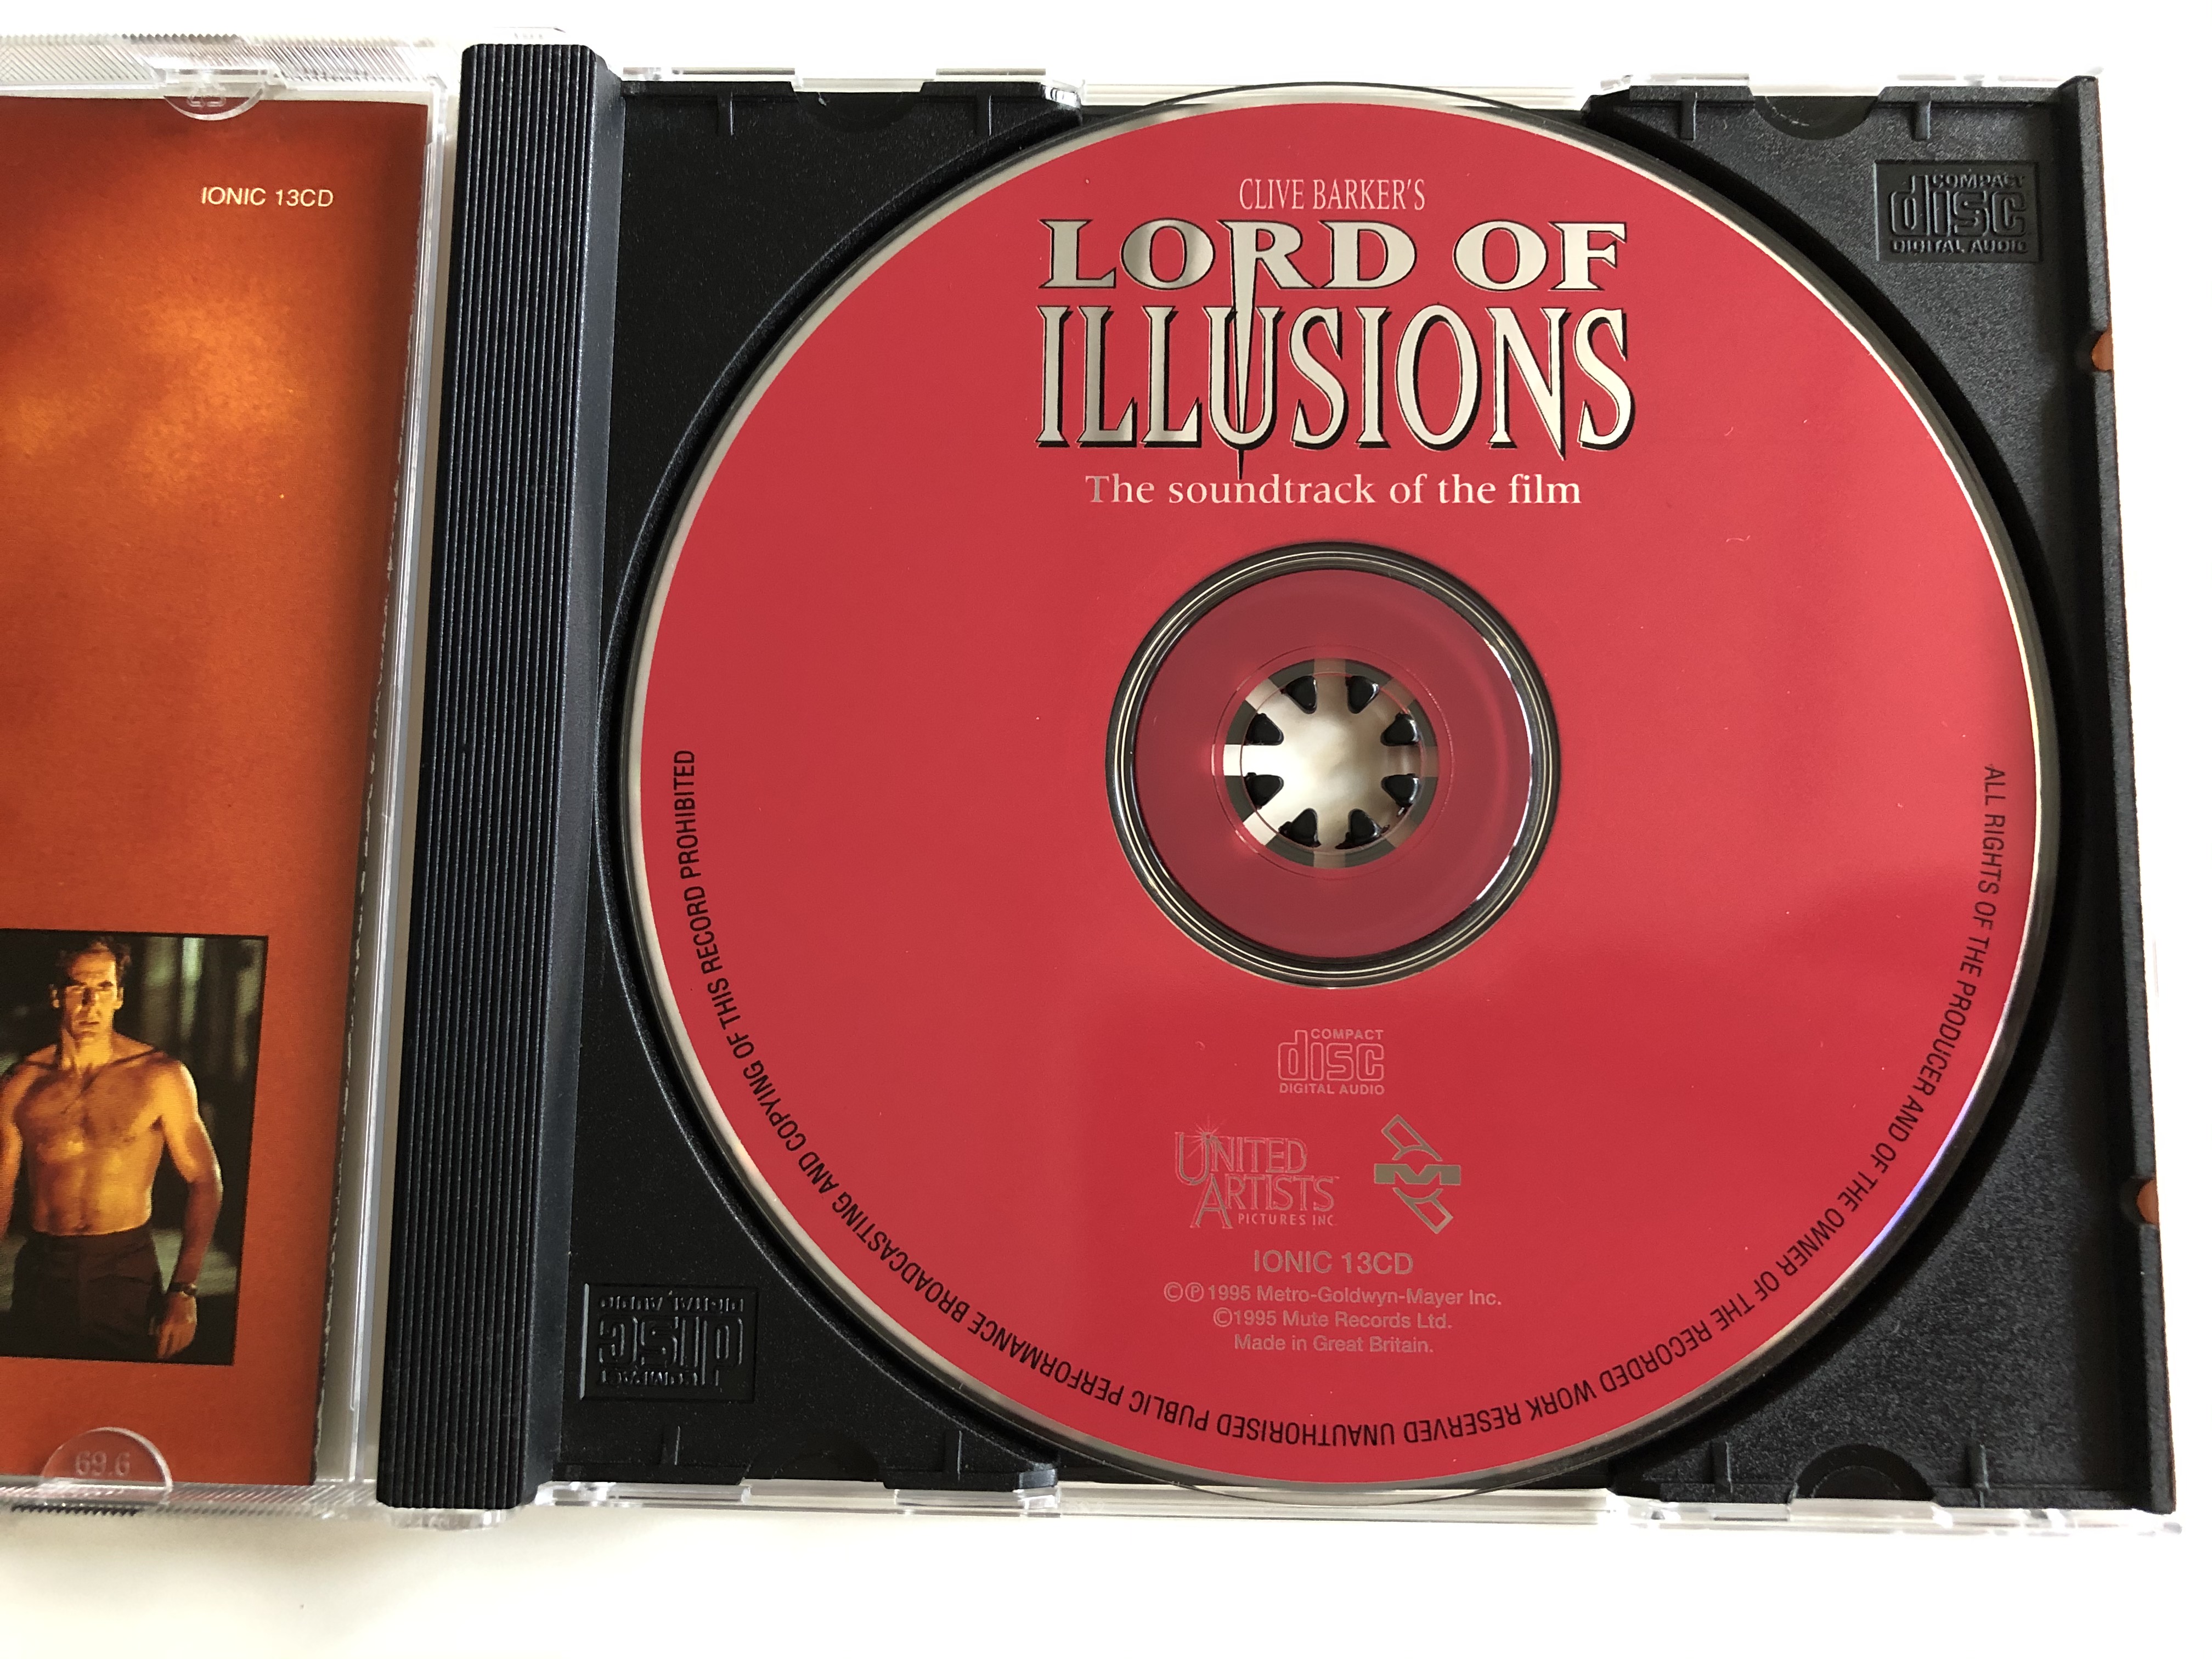 clive-barker-s-lord-of-illusions-the-soundtrack-of-the-united-artists-film-featuring-erasure-diamanda-galas-and-the-music-of-simon-boswell-mute-audio-cd-1995-ionic-13cd-4-.jpg